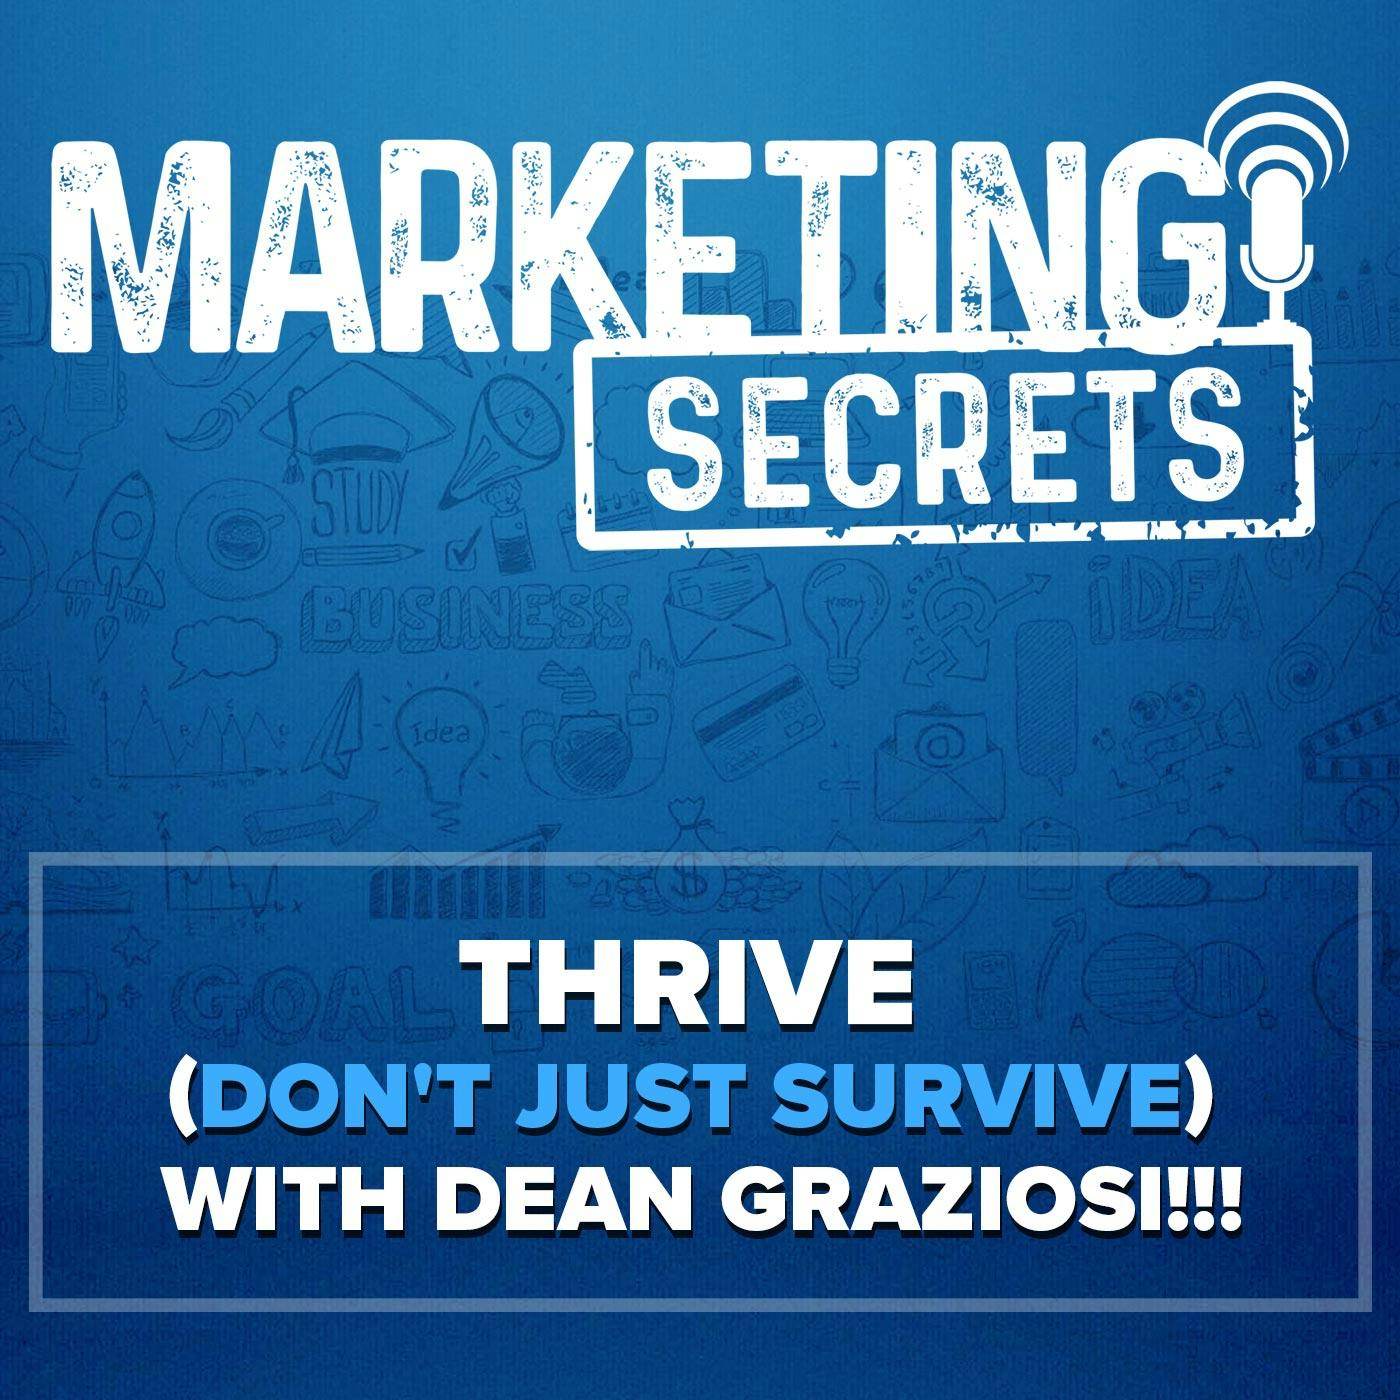 THRIVE (Don't Just Survive) with Dean Graziosi!!!